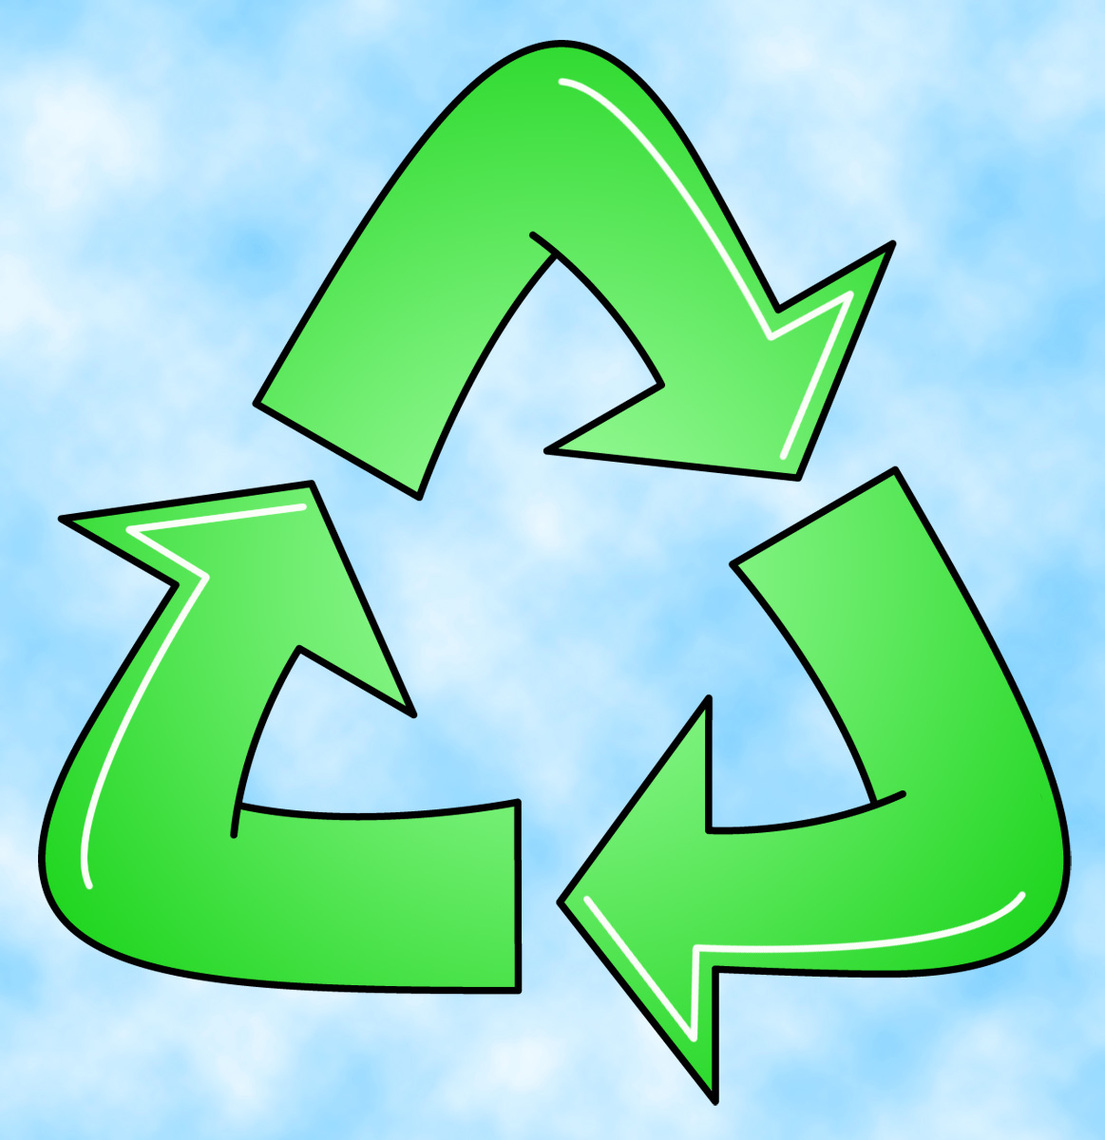 Recycle recycling symbol clipart free to use clip art resource